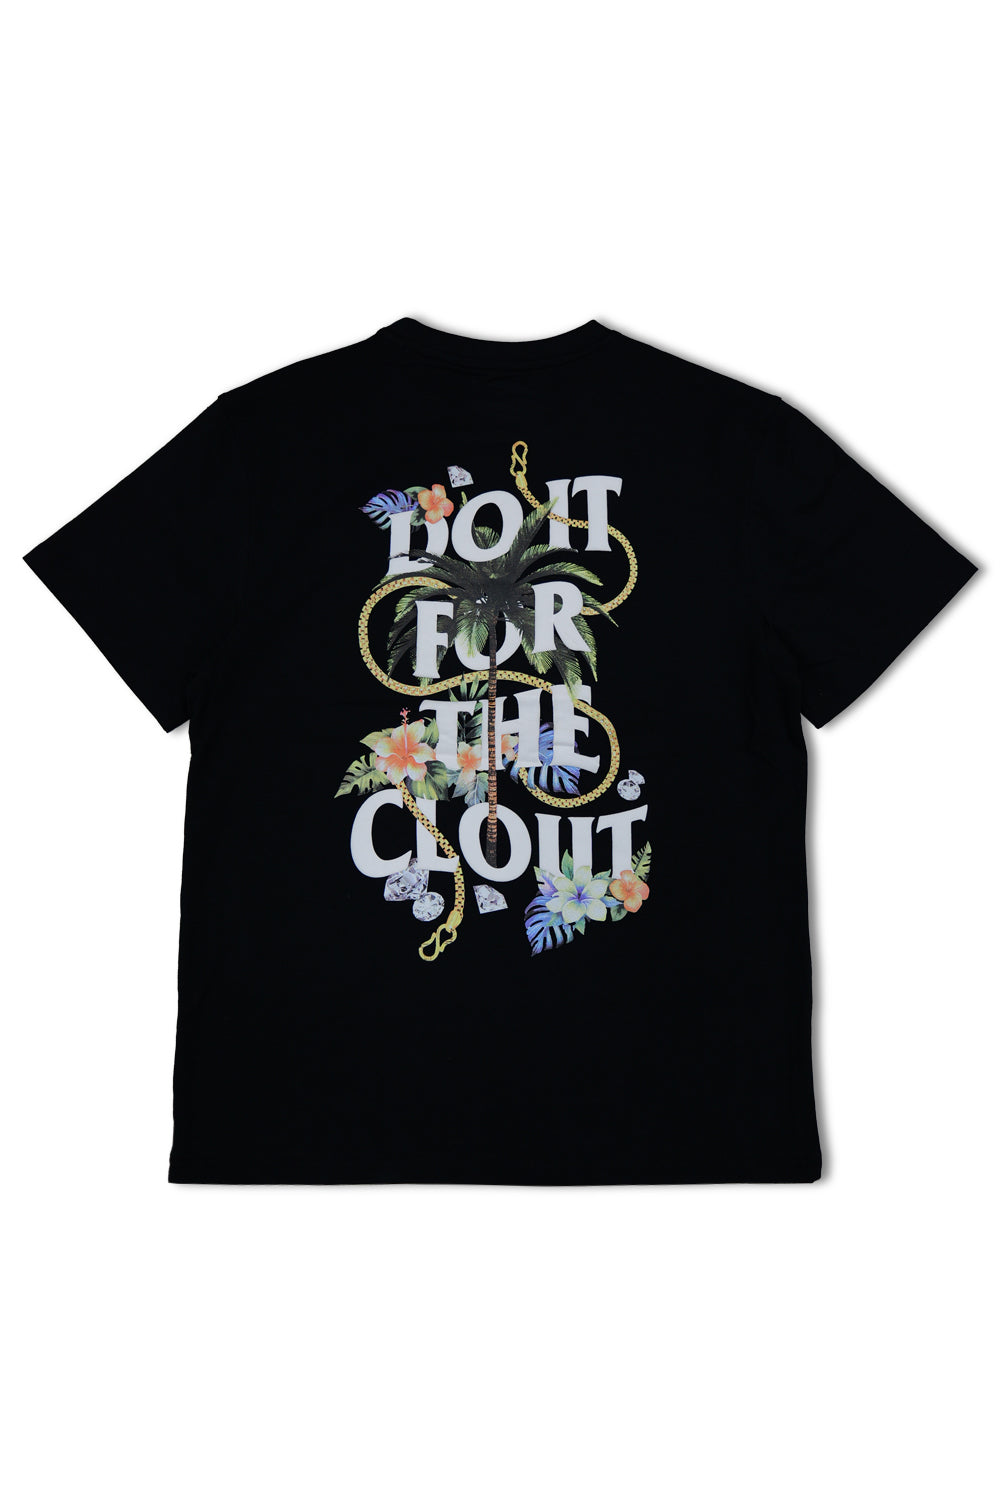 Do It For The Clout Shirt 